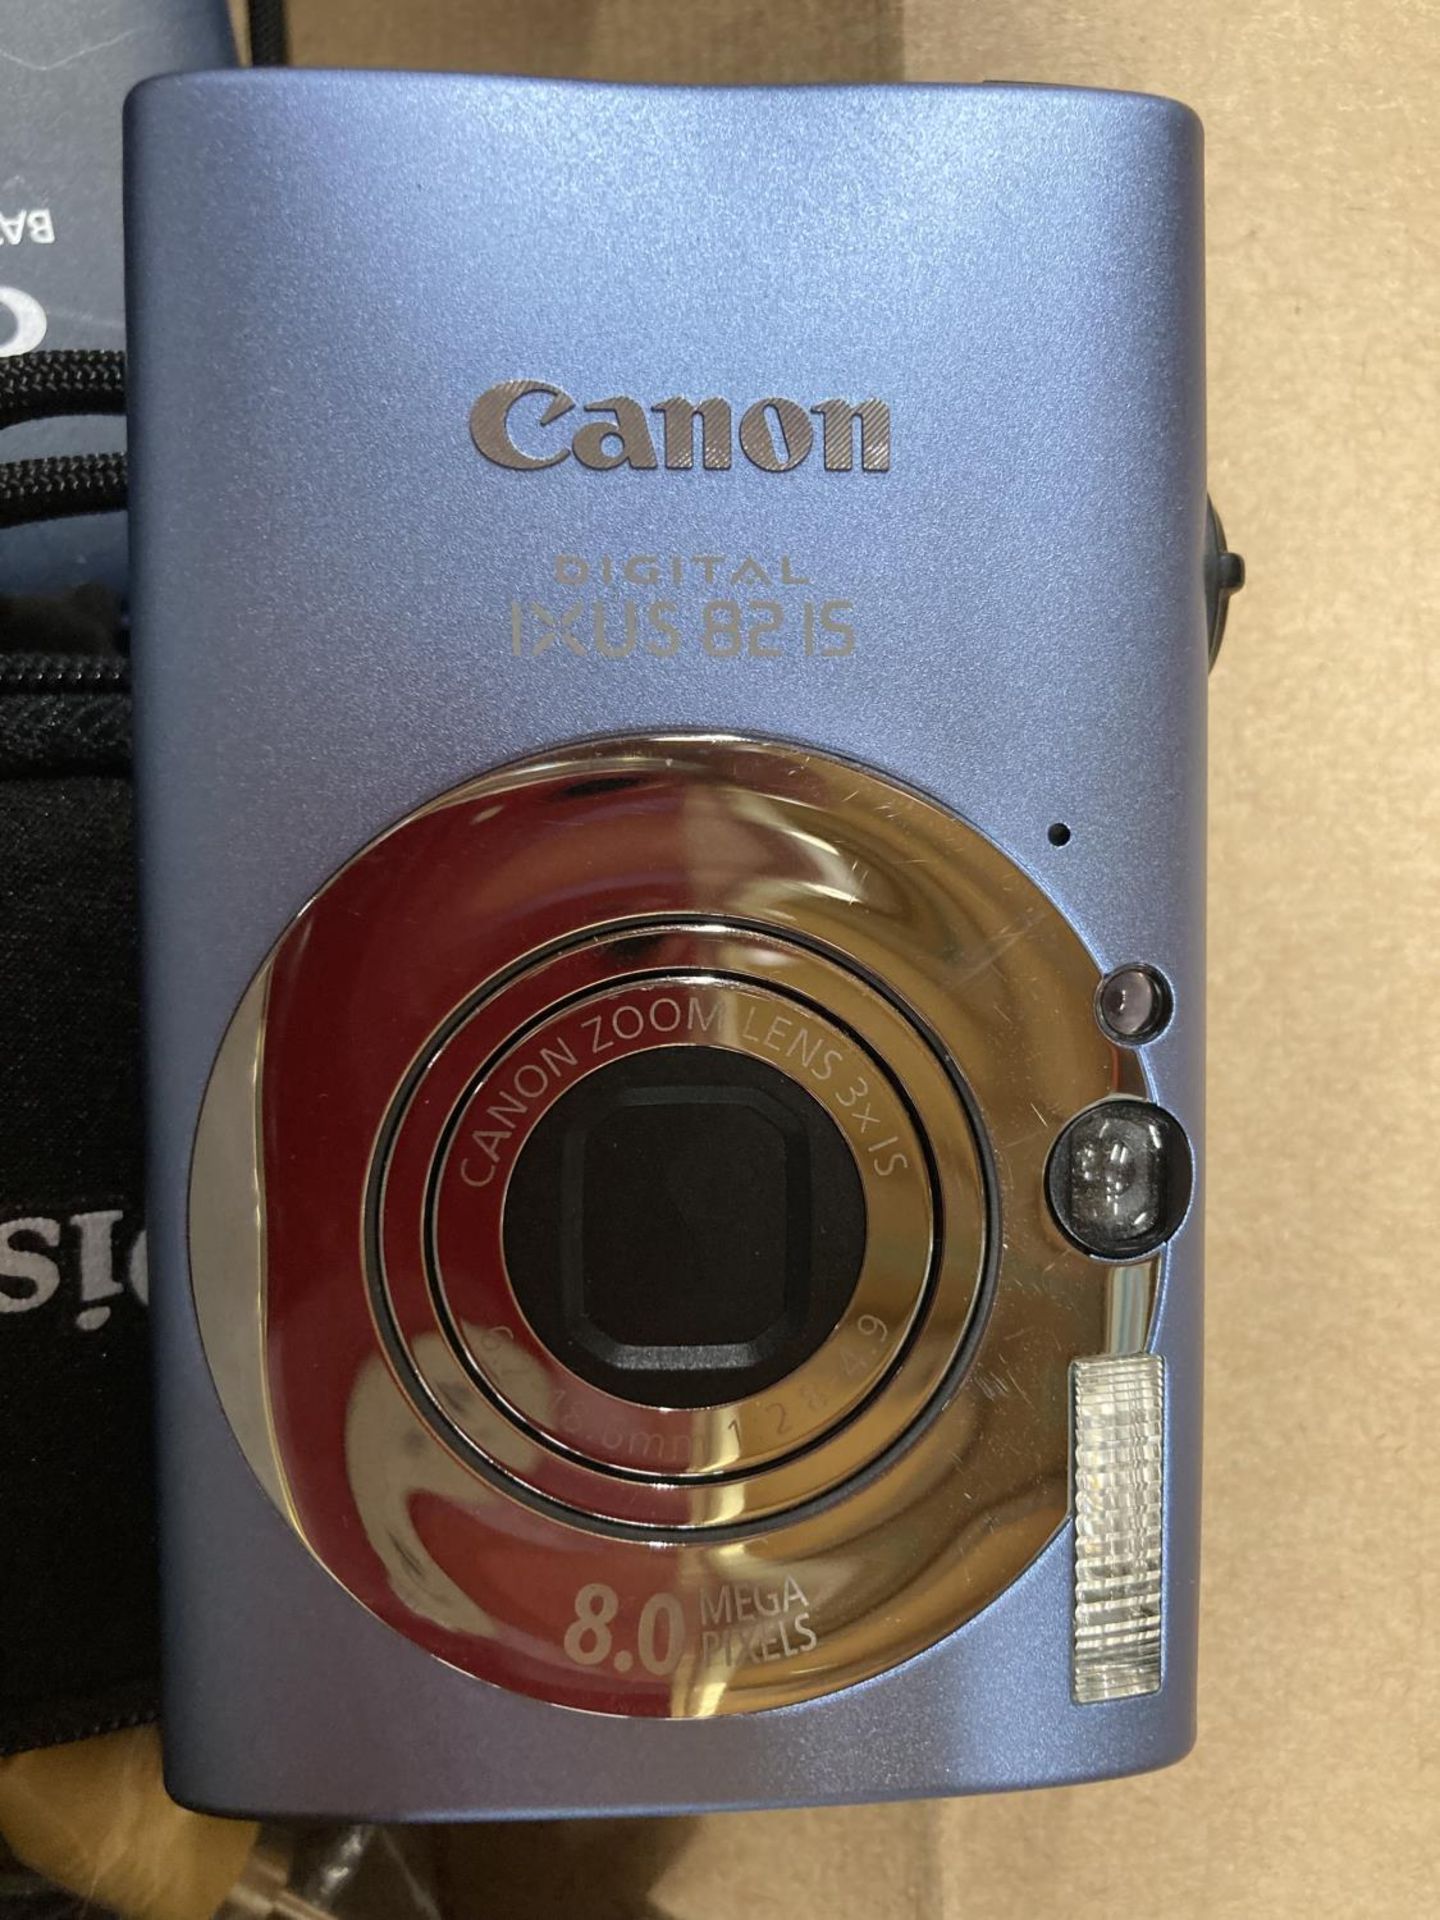 A CANON DIGITAL IXUS 82 IS CAMERA WITH CASE, CHARGER, BATTERY AND LEADS, BOXED - Image 2 of 4